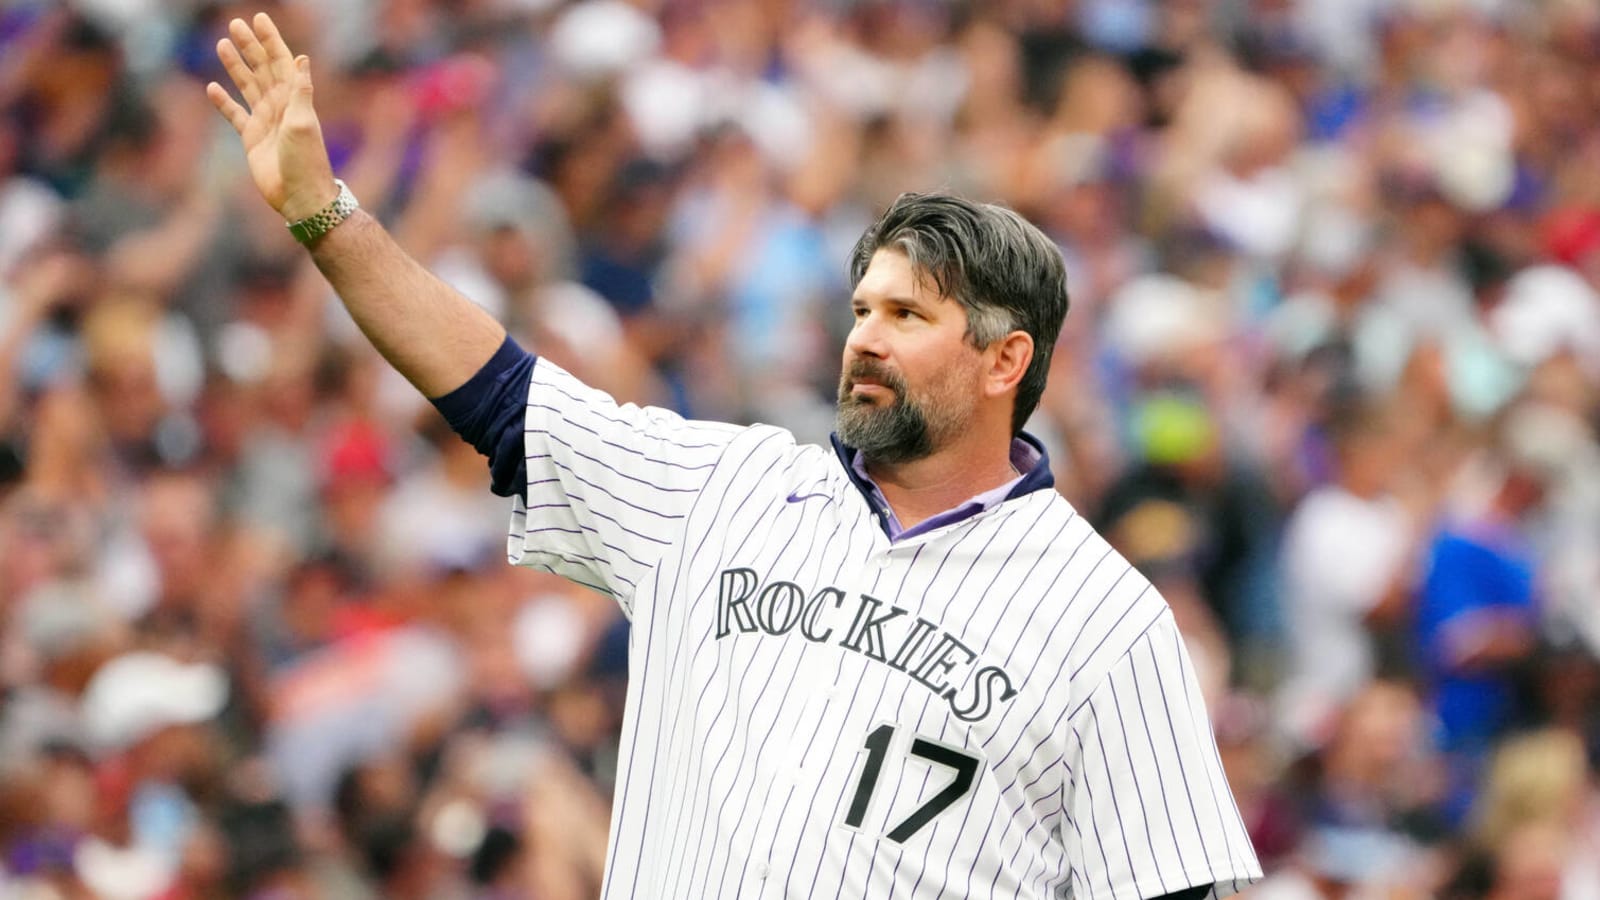 Todd Helton to rejoin Rockies as special assistant to GM